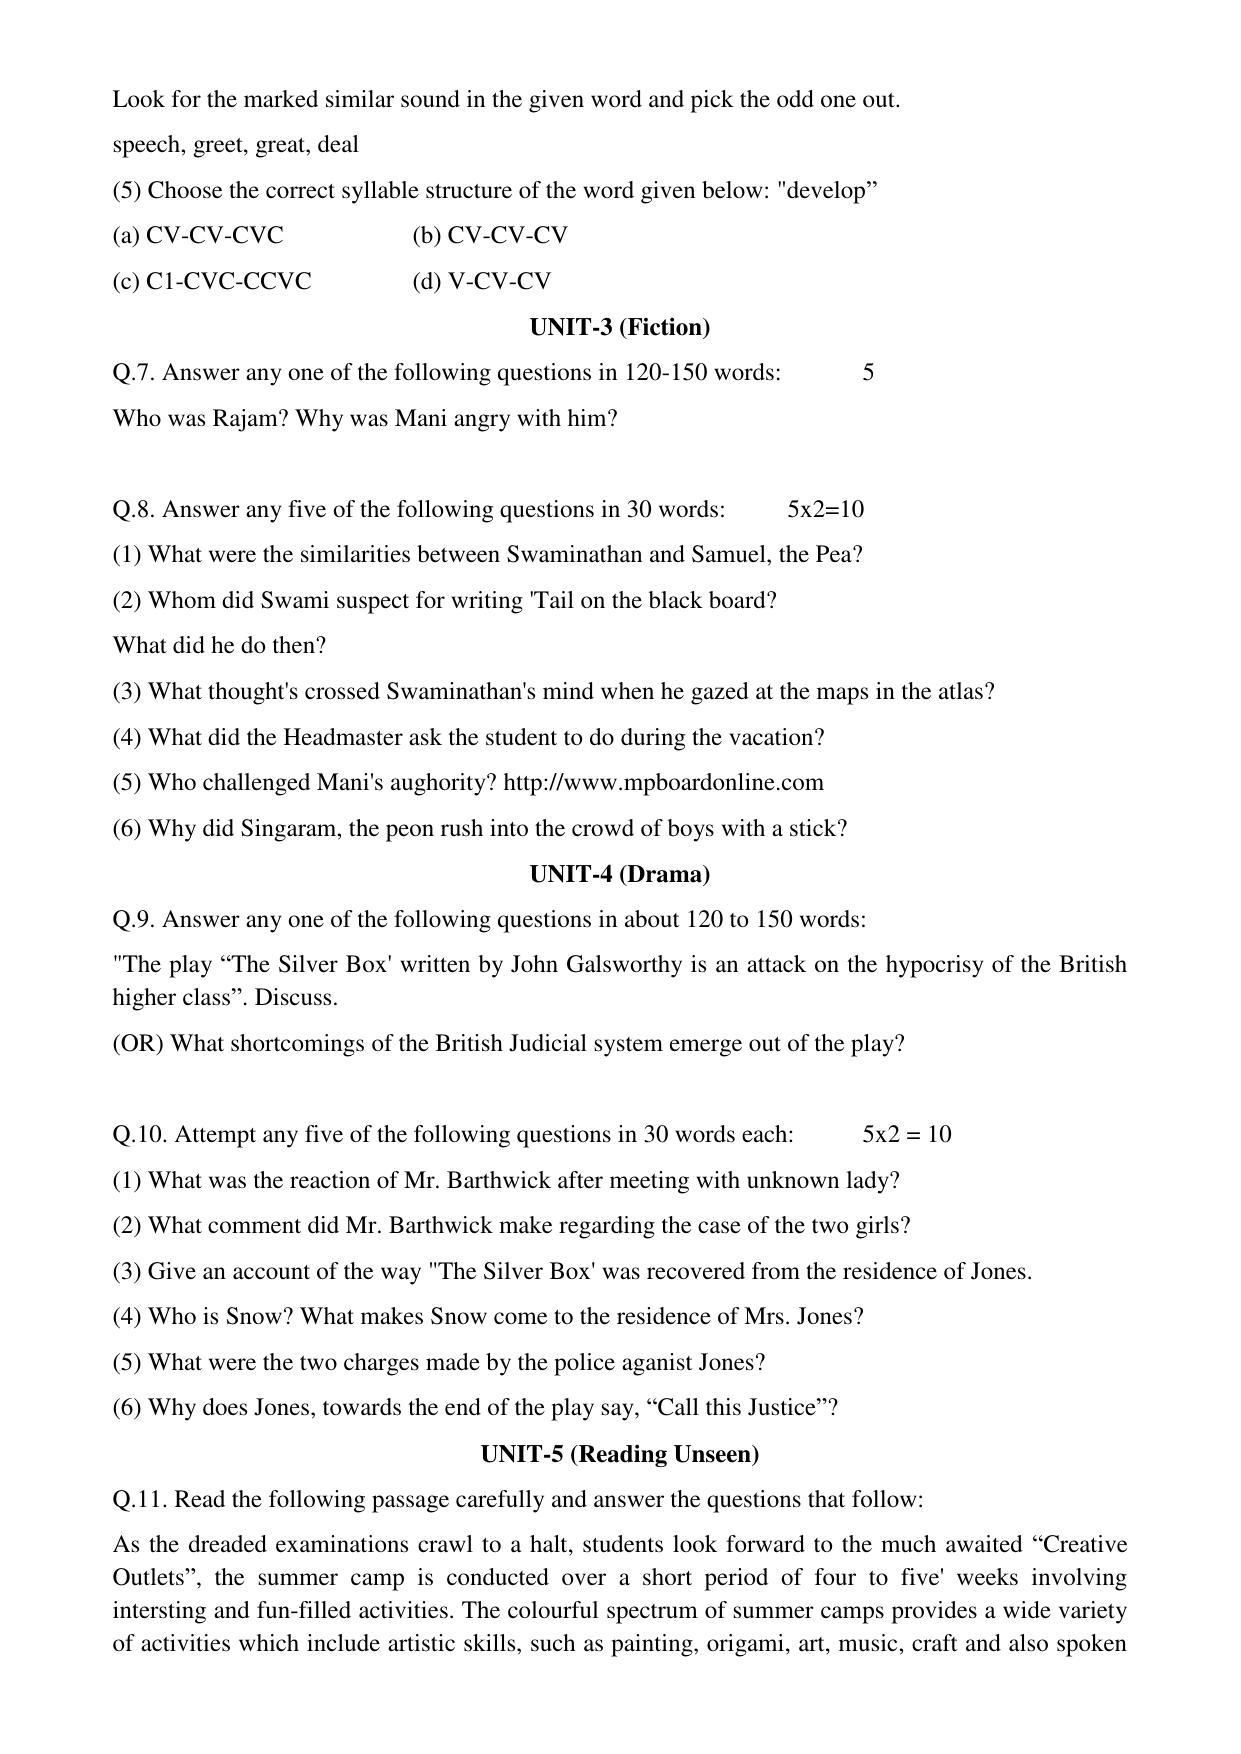 MP Board Class 12 English Special 2018 Question Paper - Page 3